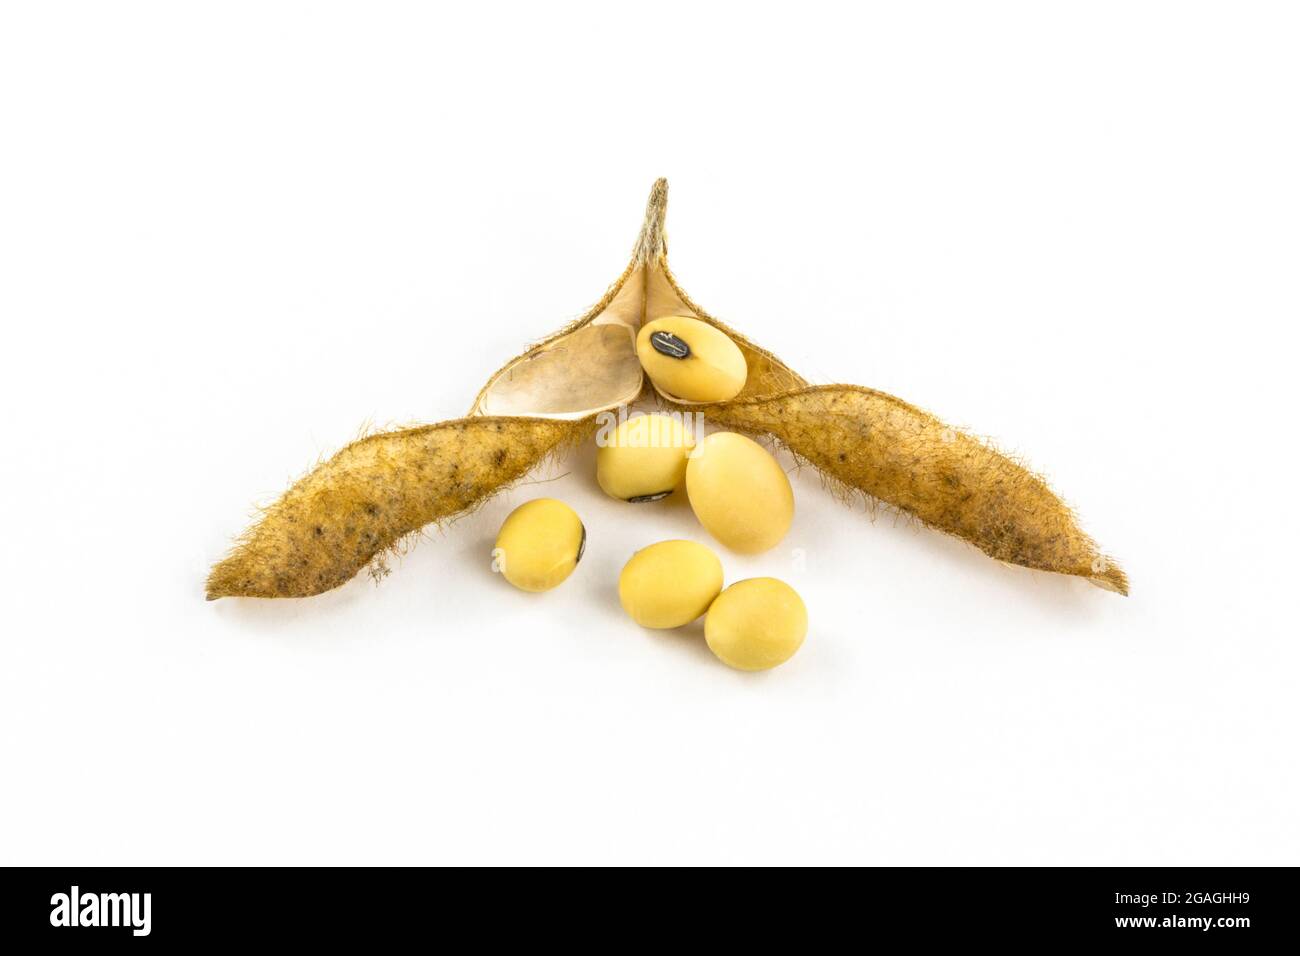 Opened dried soybean with seeds isolated on a white background. Studio shot Stock Photo